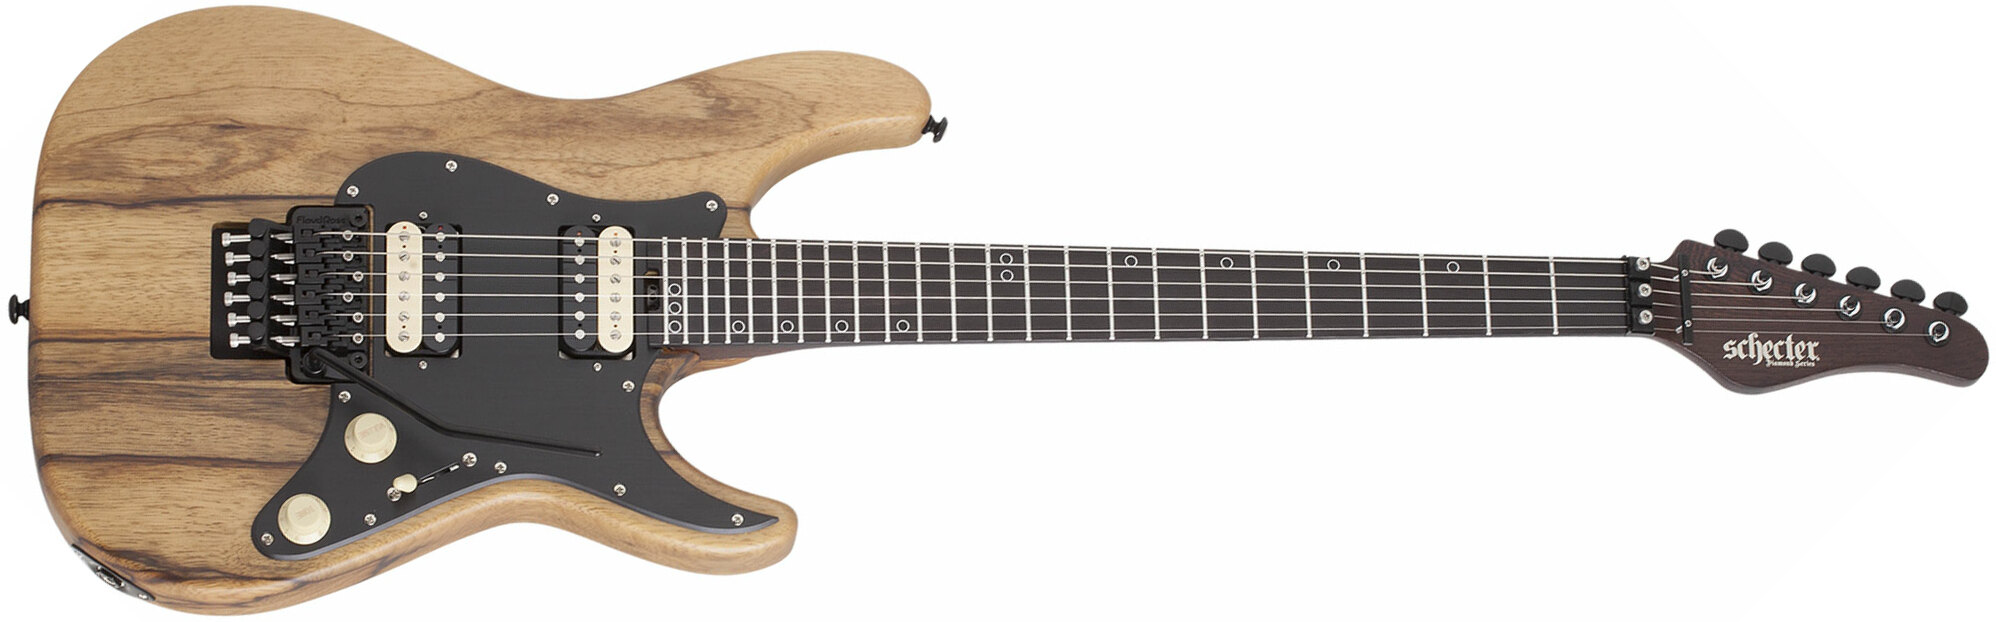 Schecter Sun Valley Super Shredder Exotic Black Limba 2h Fr Eb - Natural - Metal electric guitar - Main picture